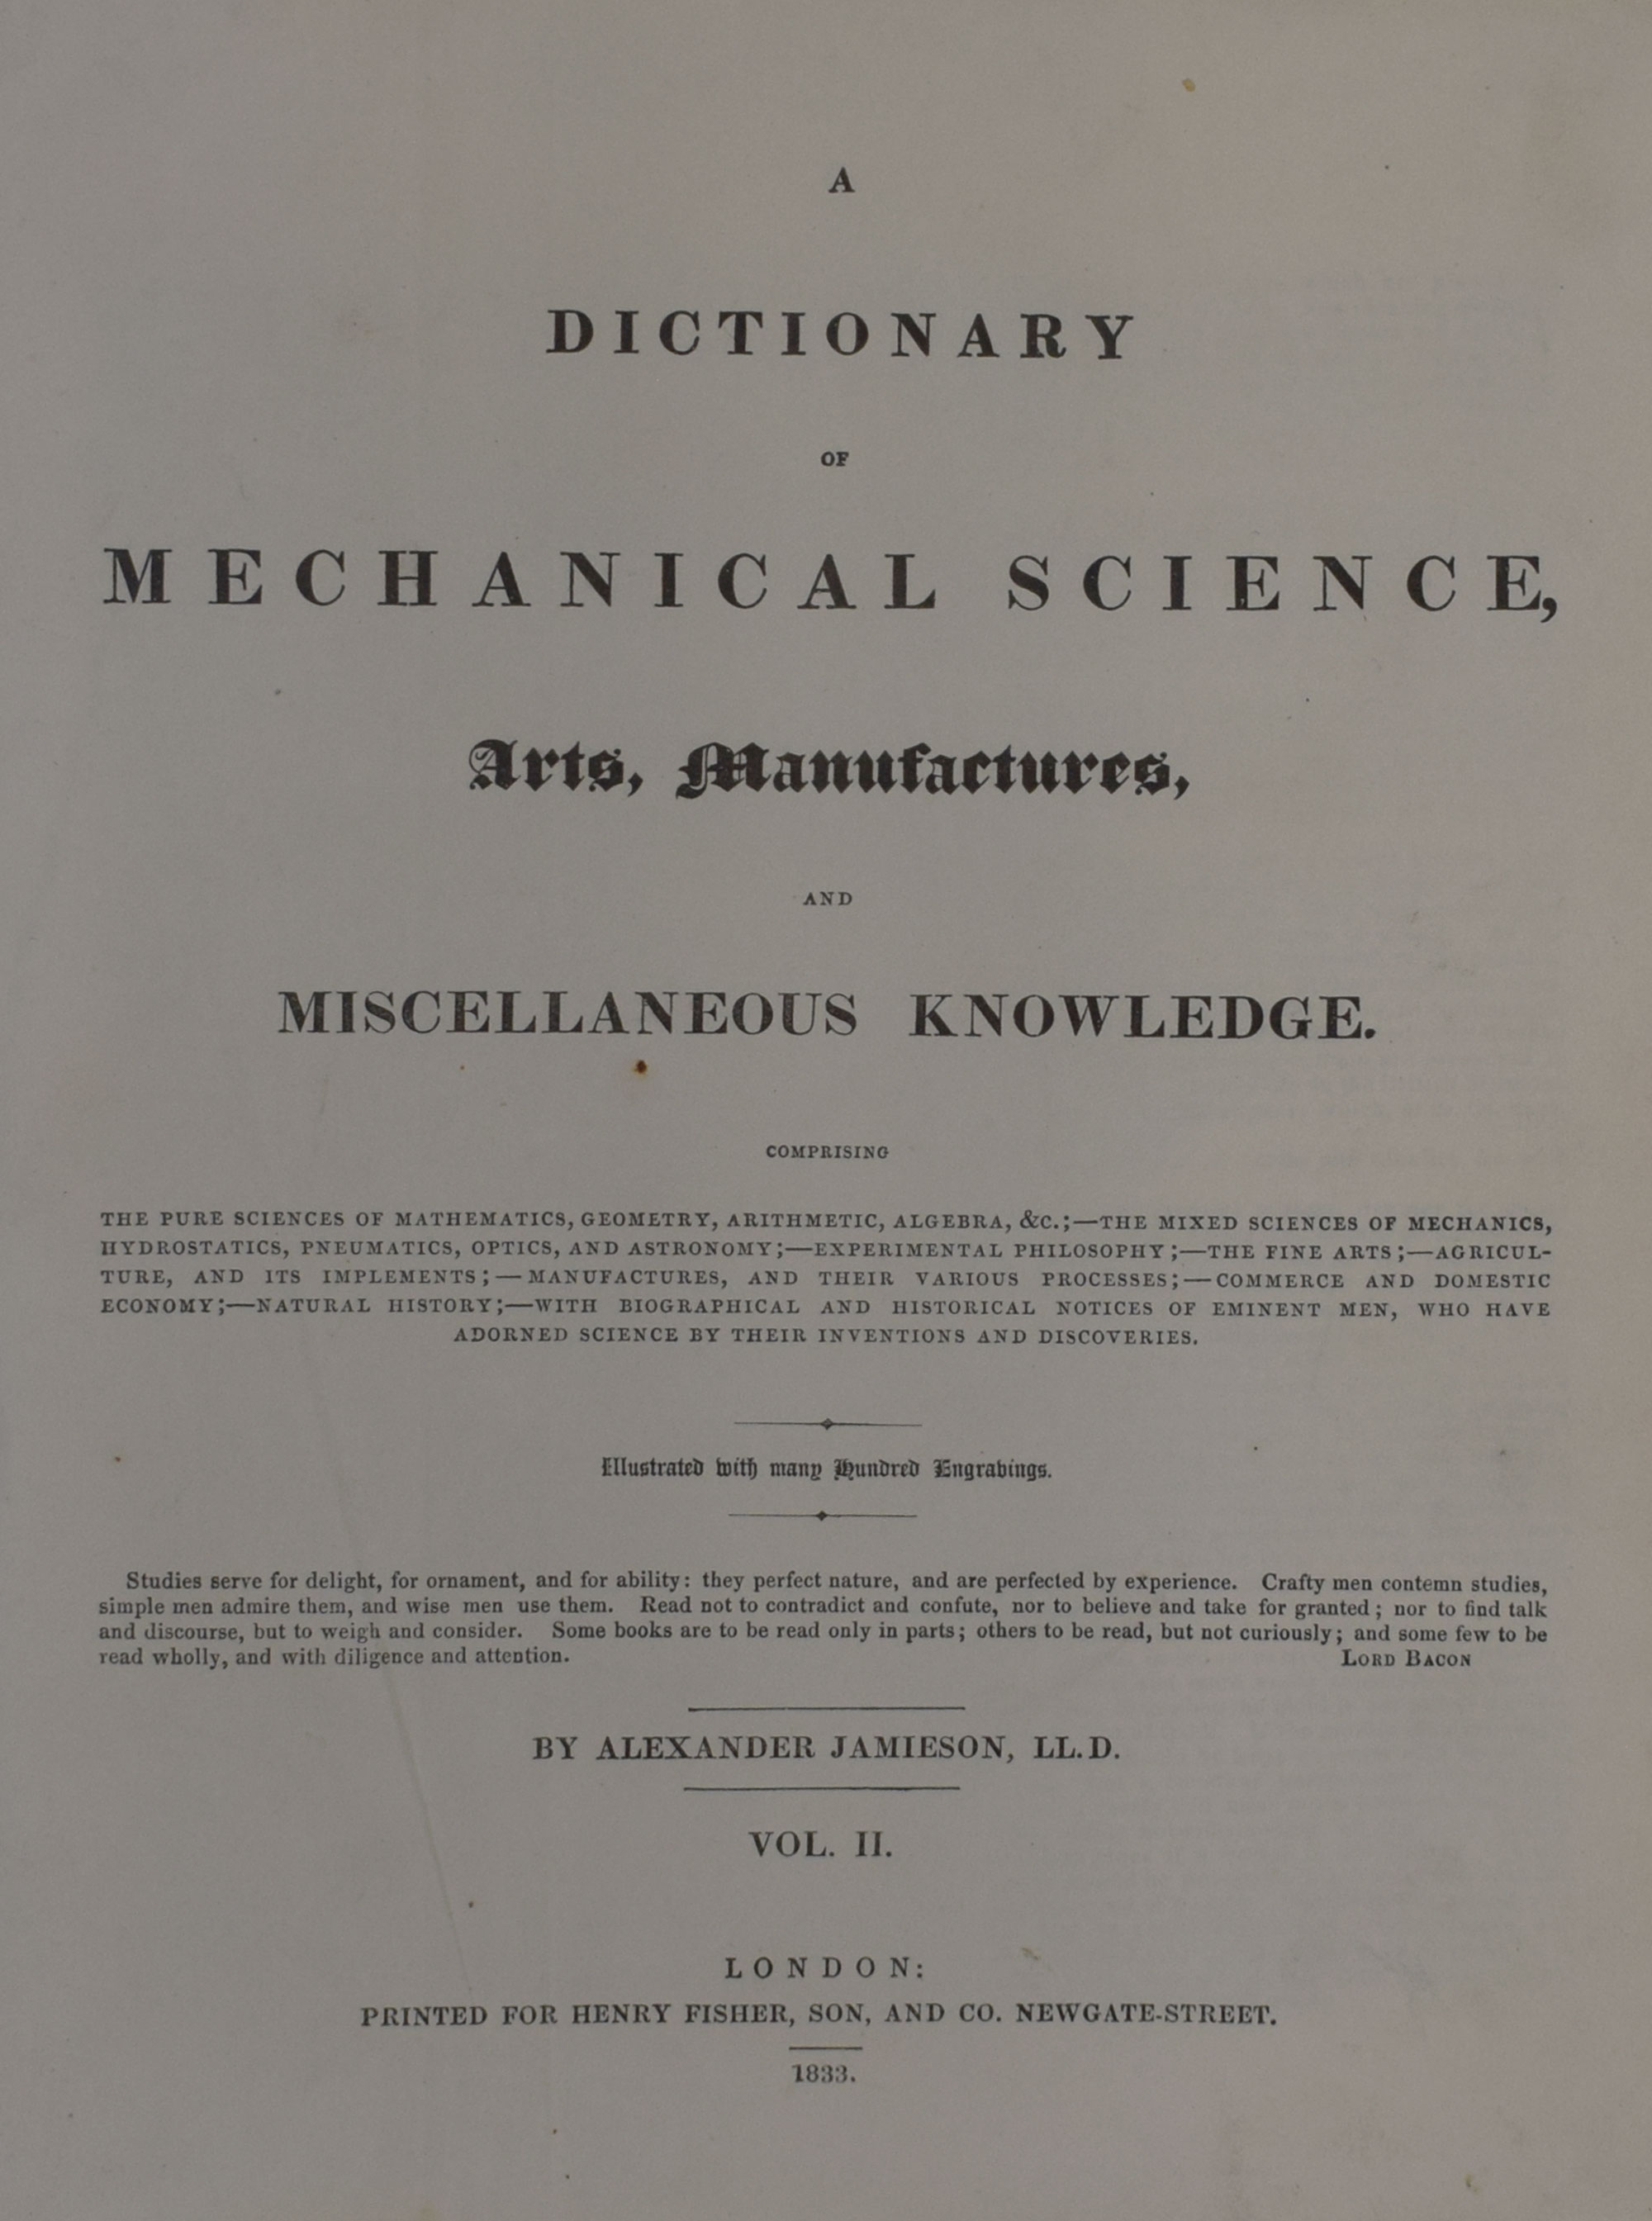 A Dictionary of Mechanical Science, Arts, Manufacturers and Miscellaneous Knowledge. 2 volume set.